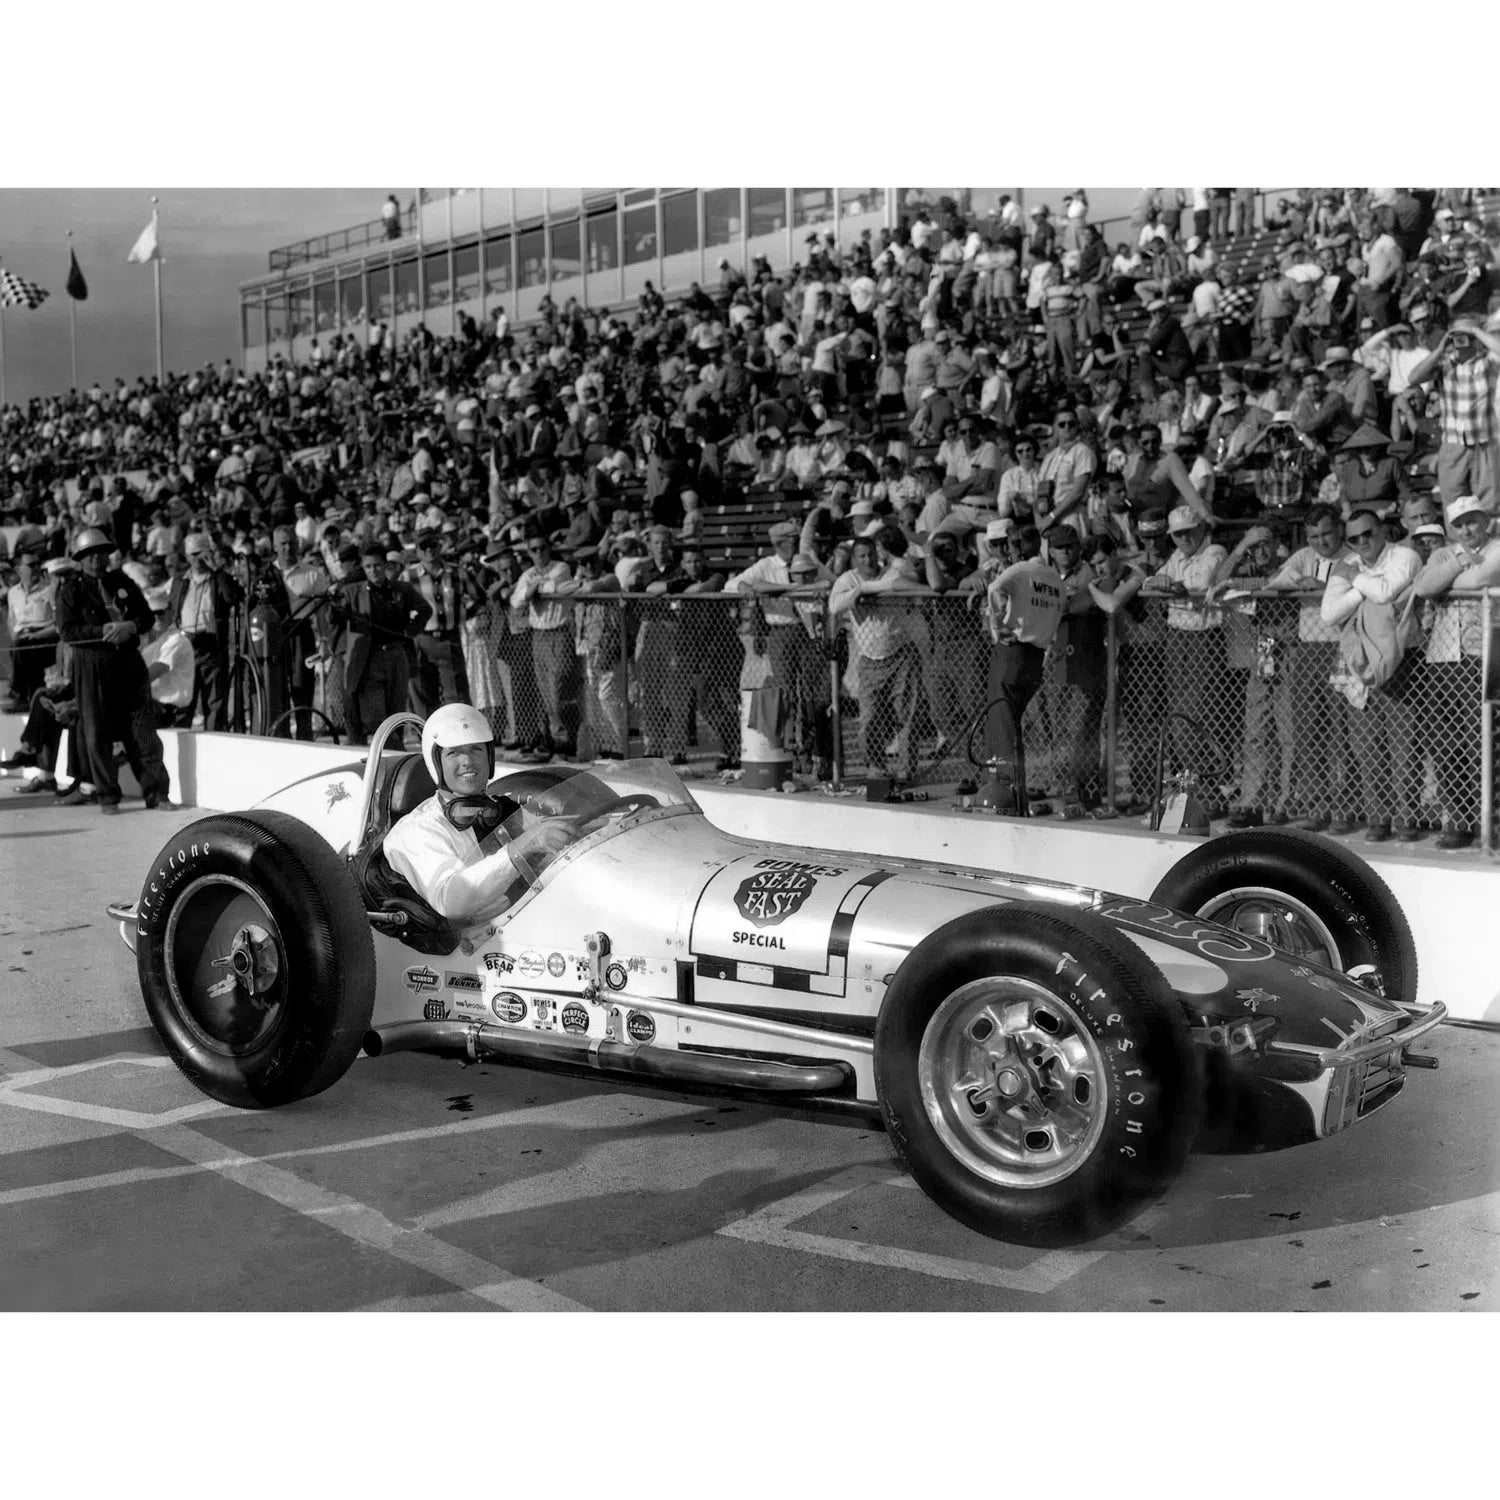 Auto Racing Indy 500 - A.J. Foyt-Imagesdartistes